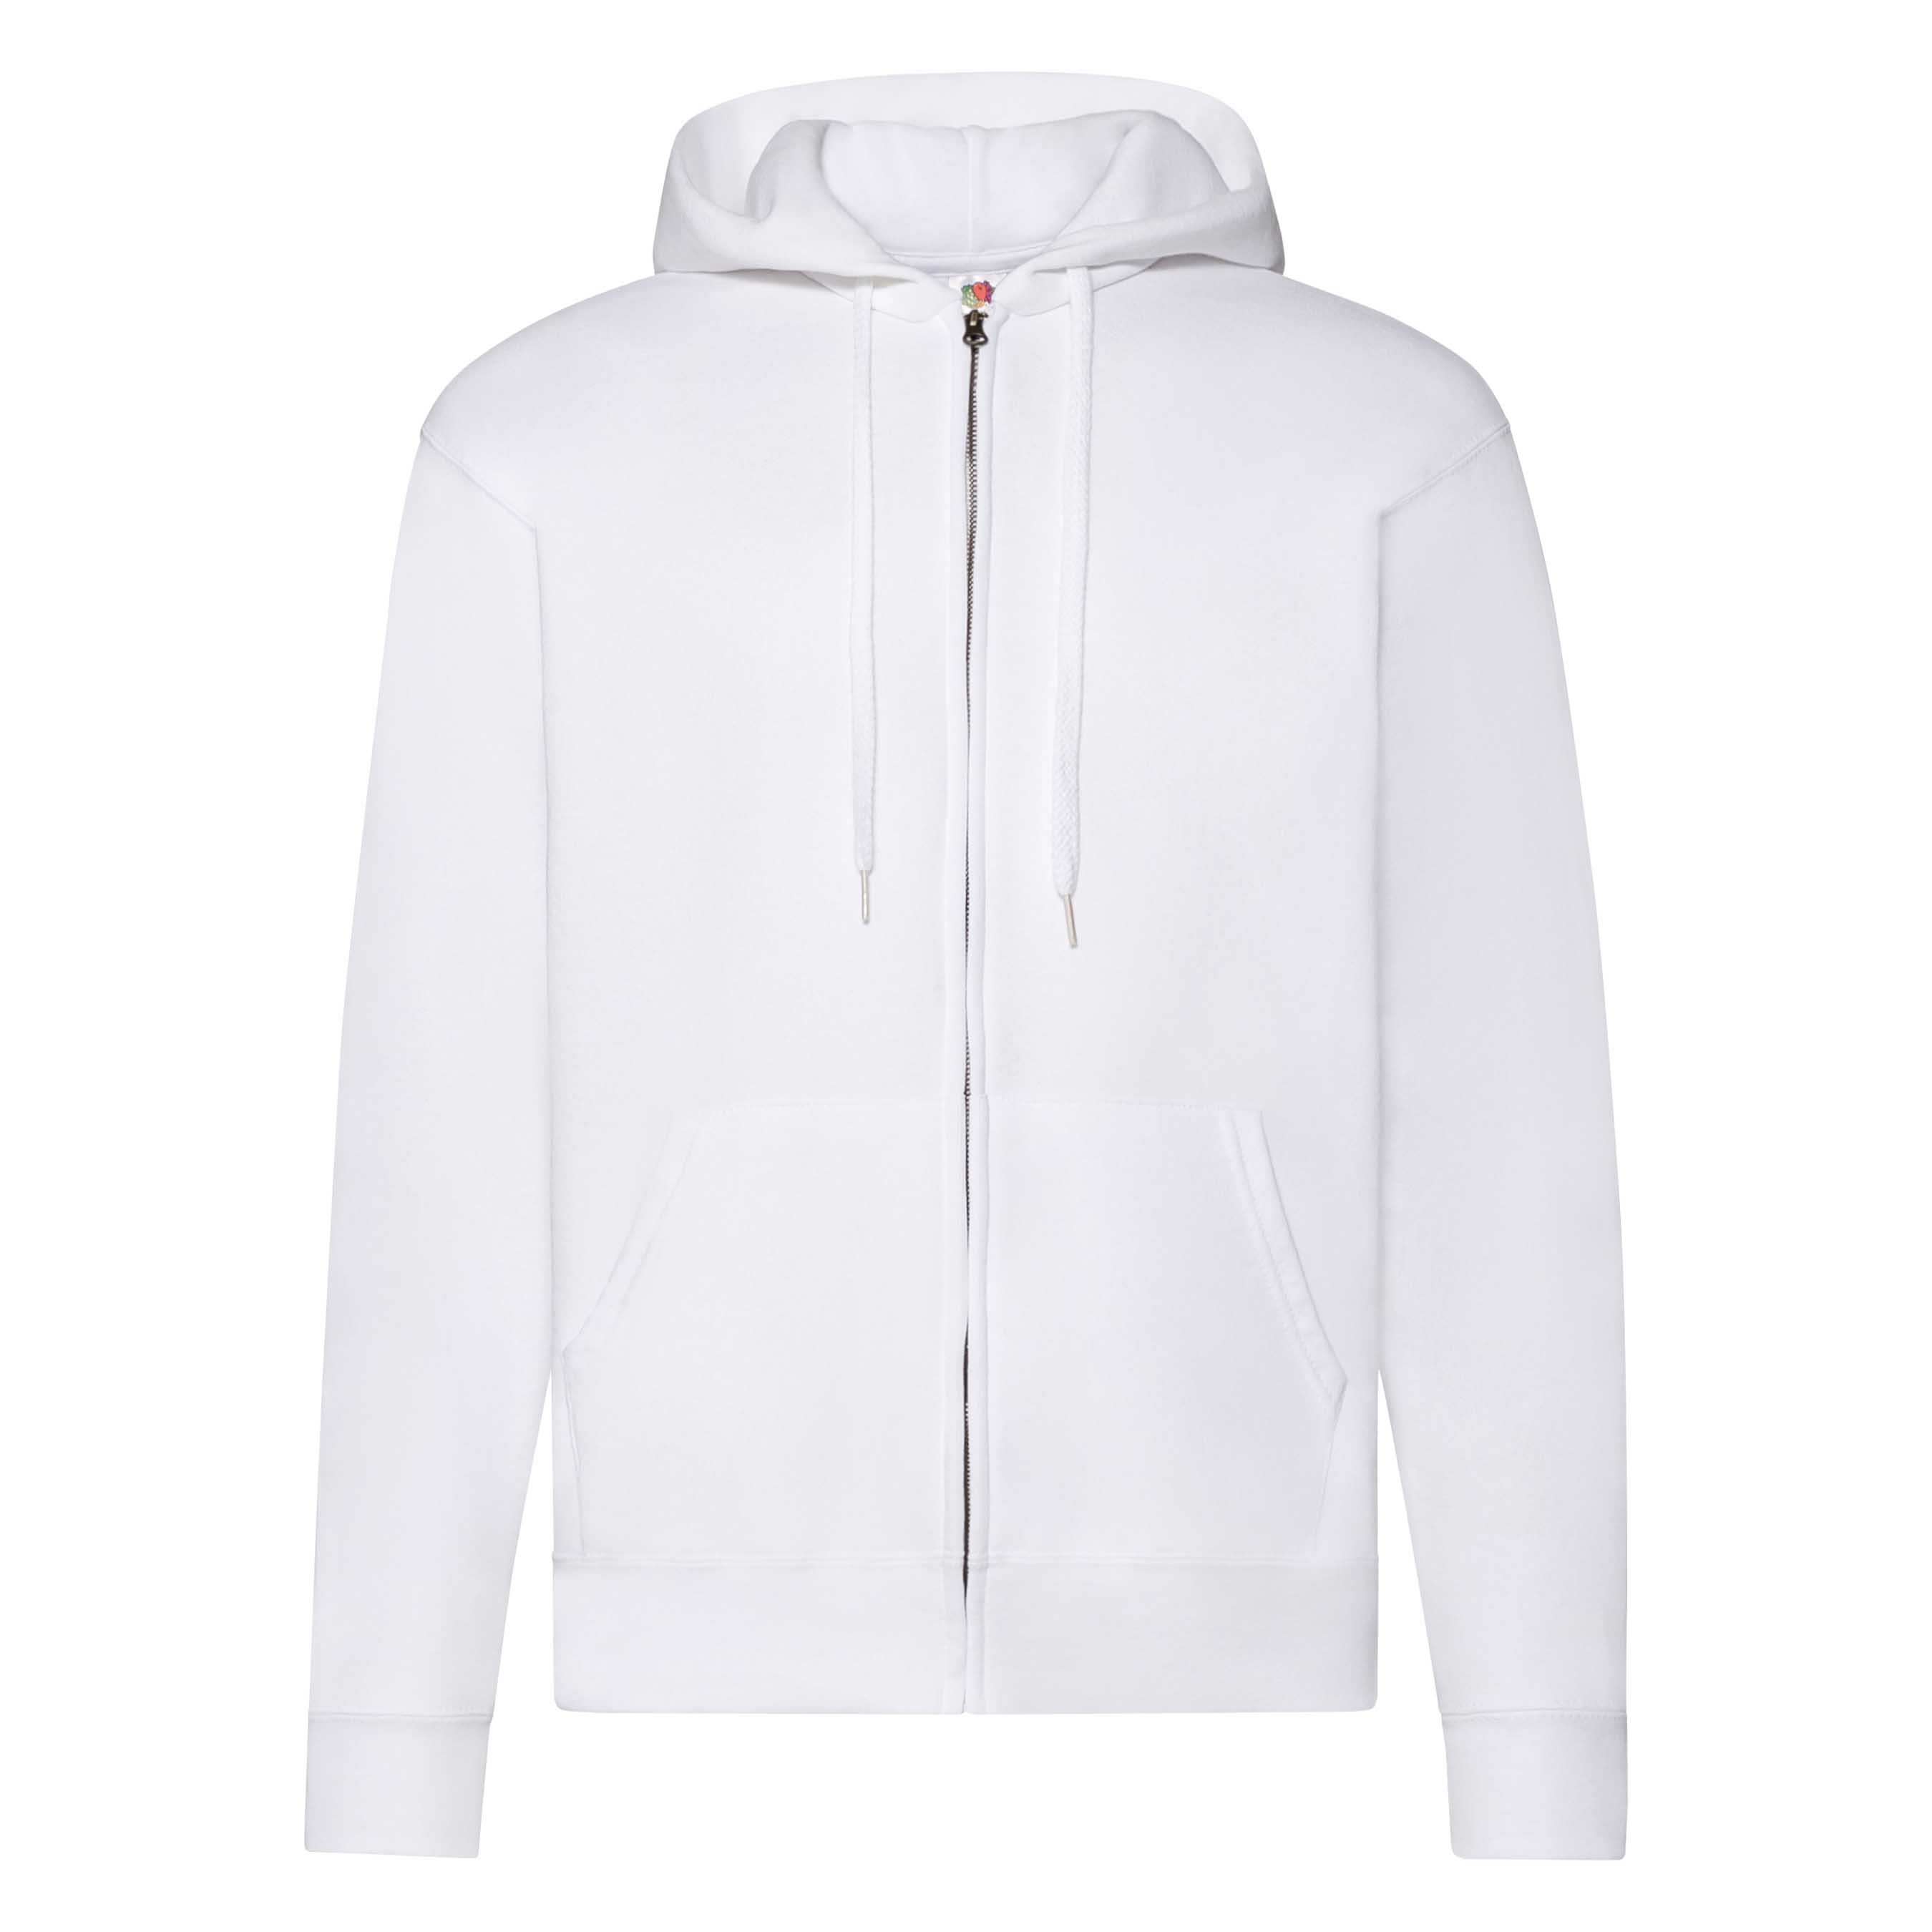 CLASSIC HOODED SWEAT JACKET | Fruit of the Loom